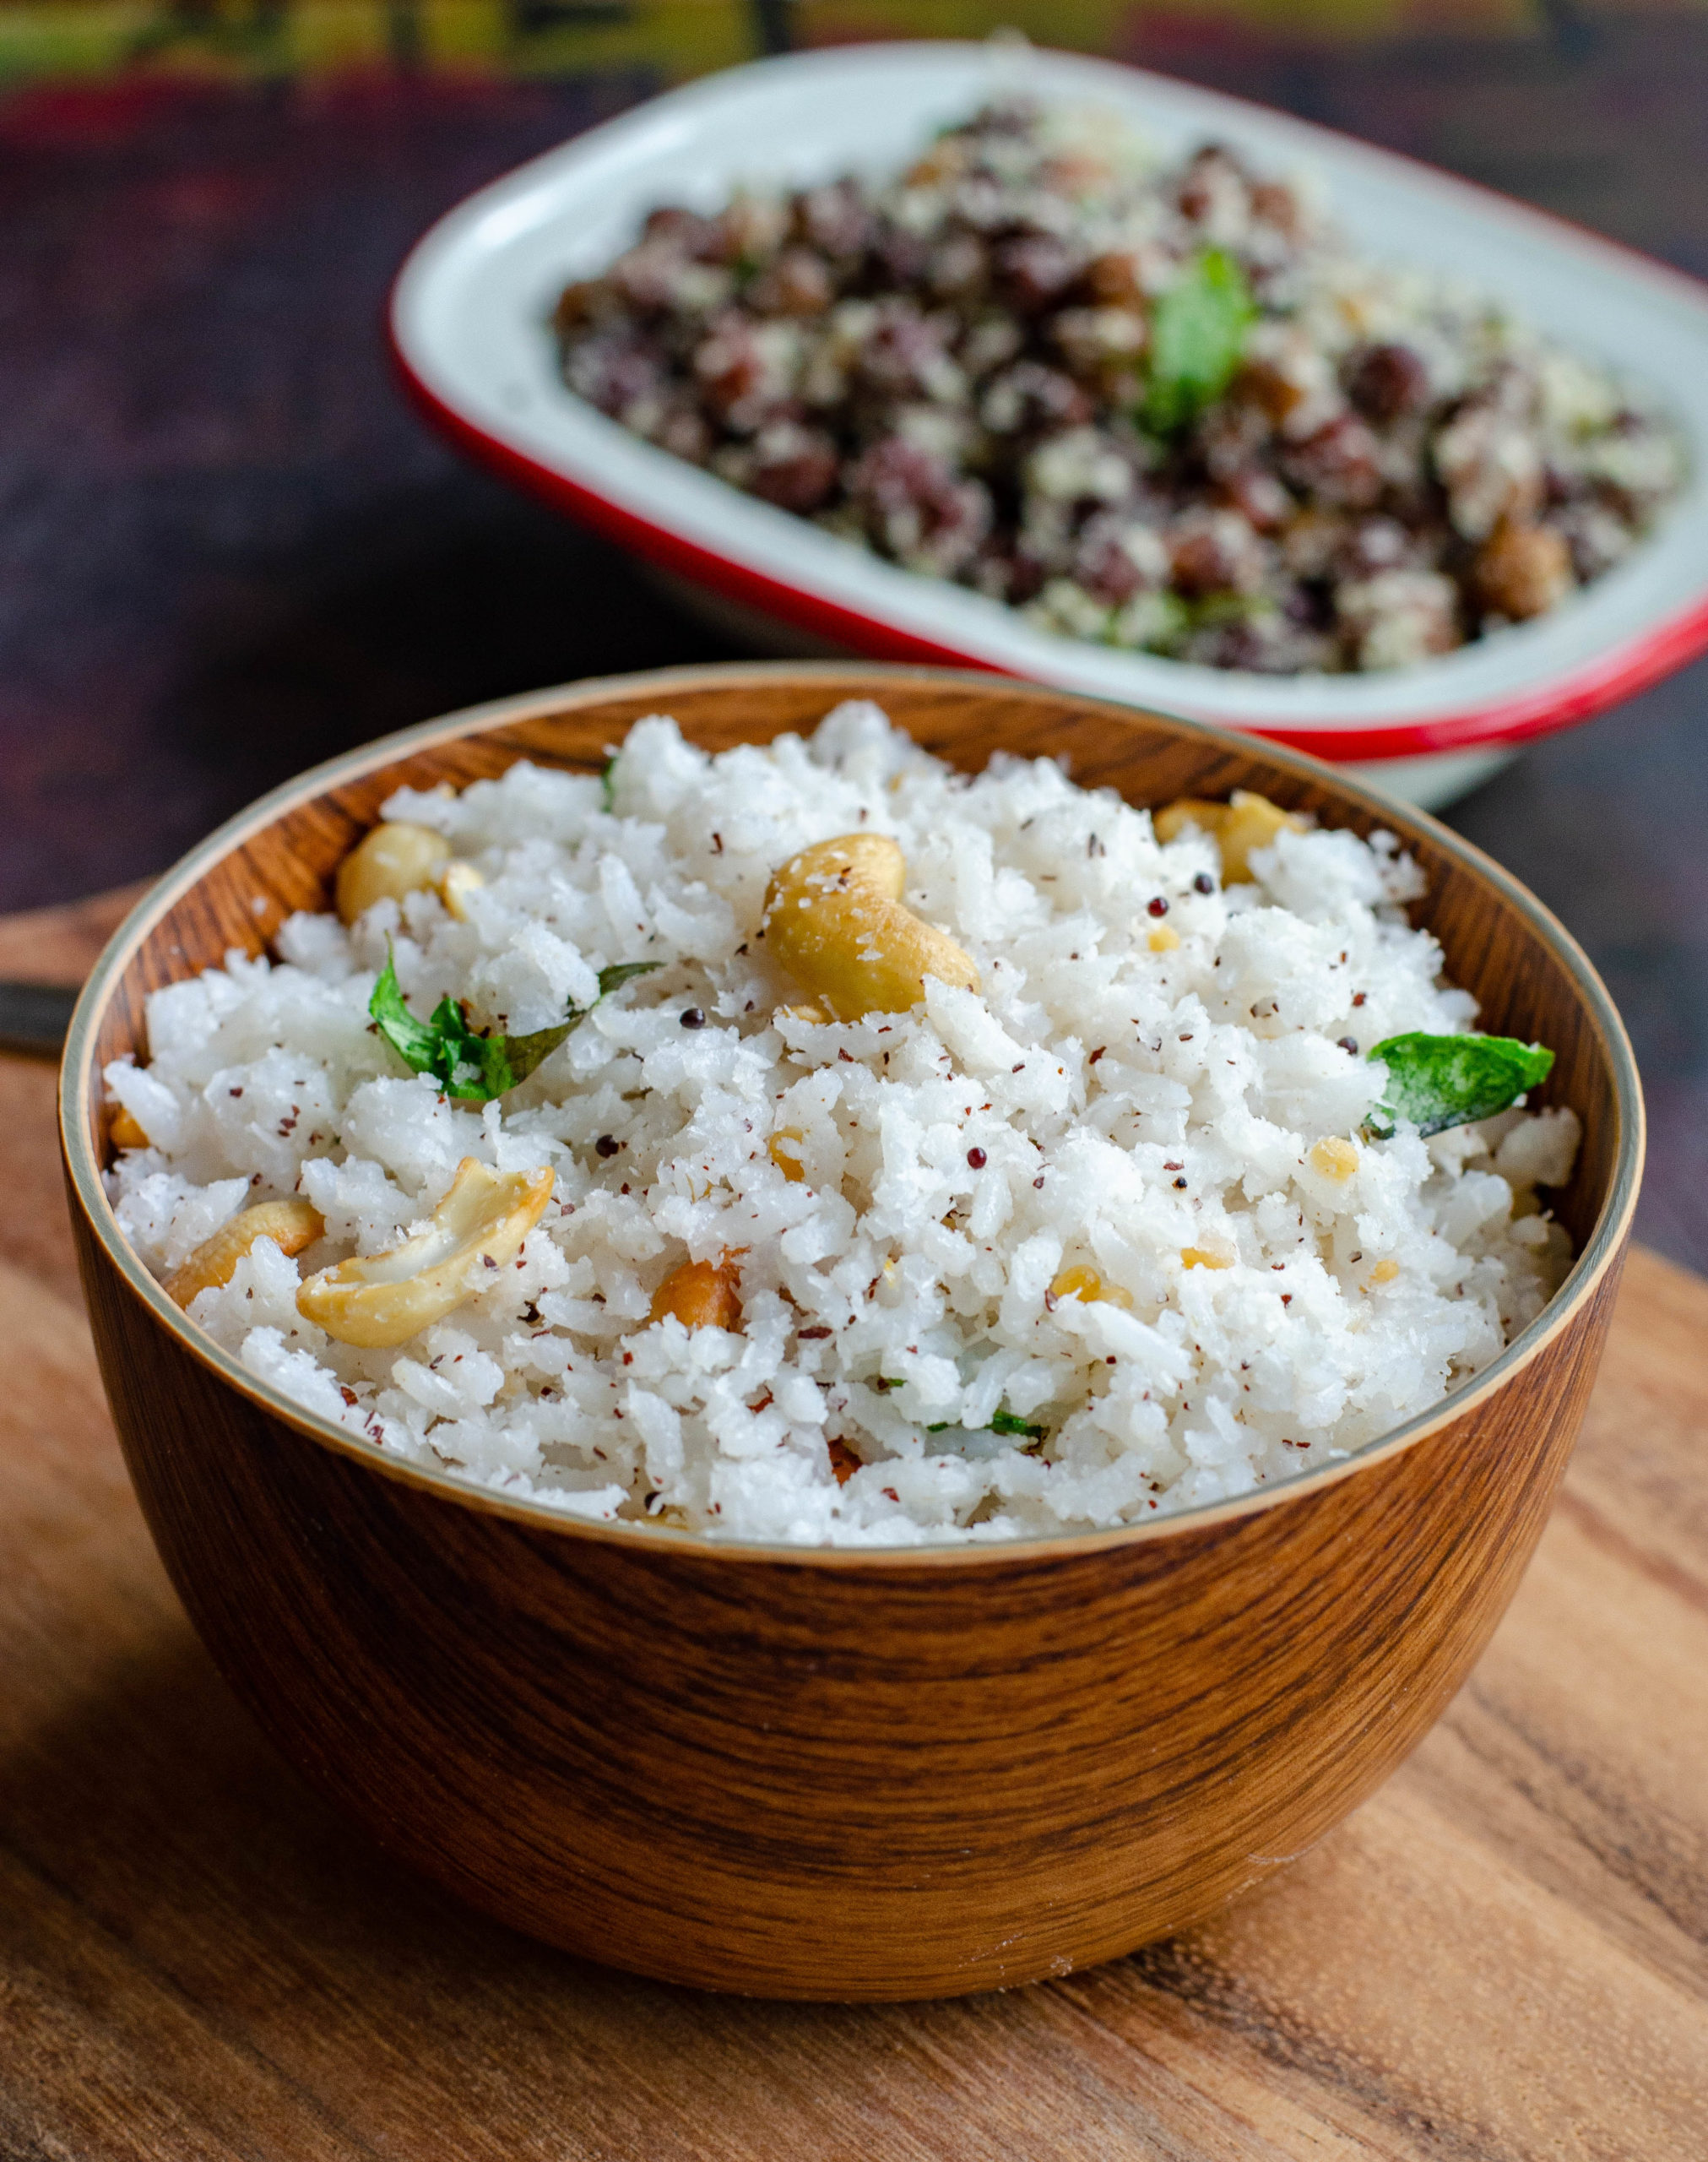 Thengai Sadam, south Indian style coconut rice served along with Kaala channa stir fry. Both placed at an angle to each other on a wooden chopping board.